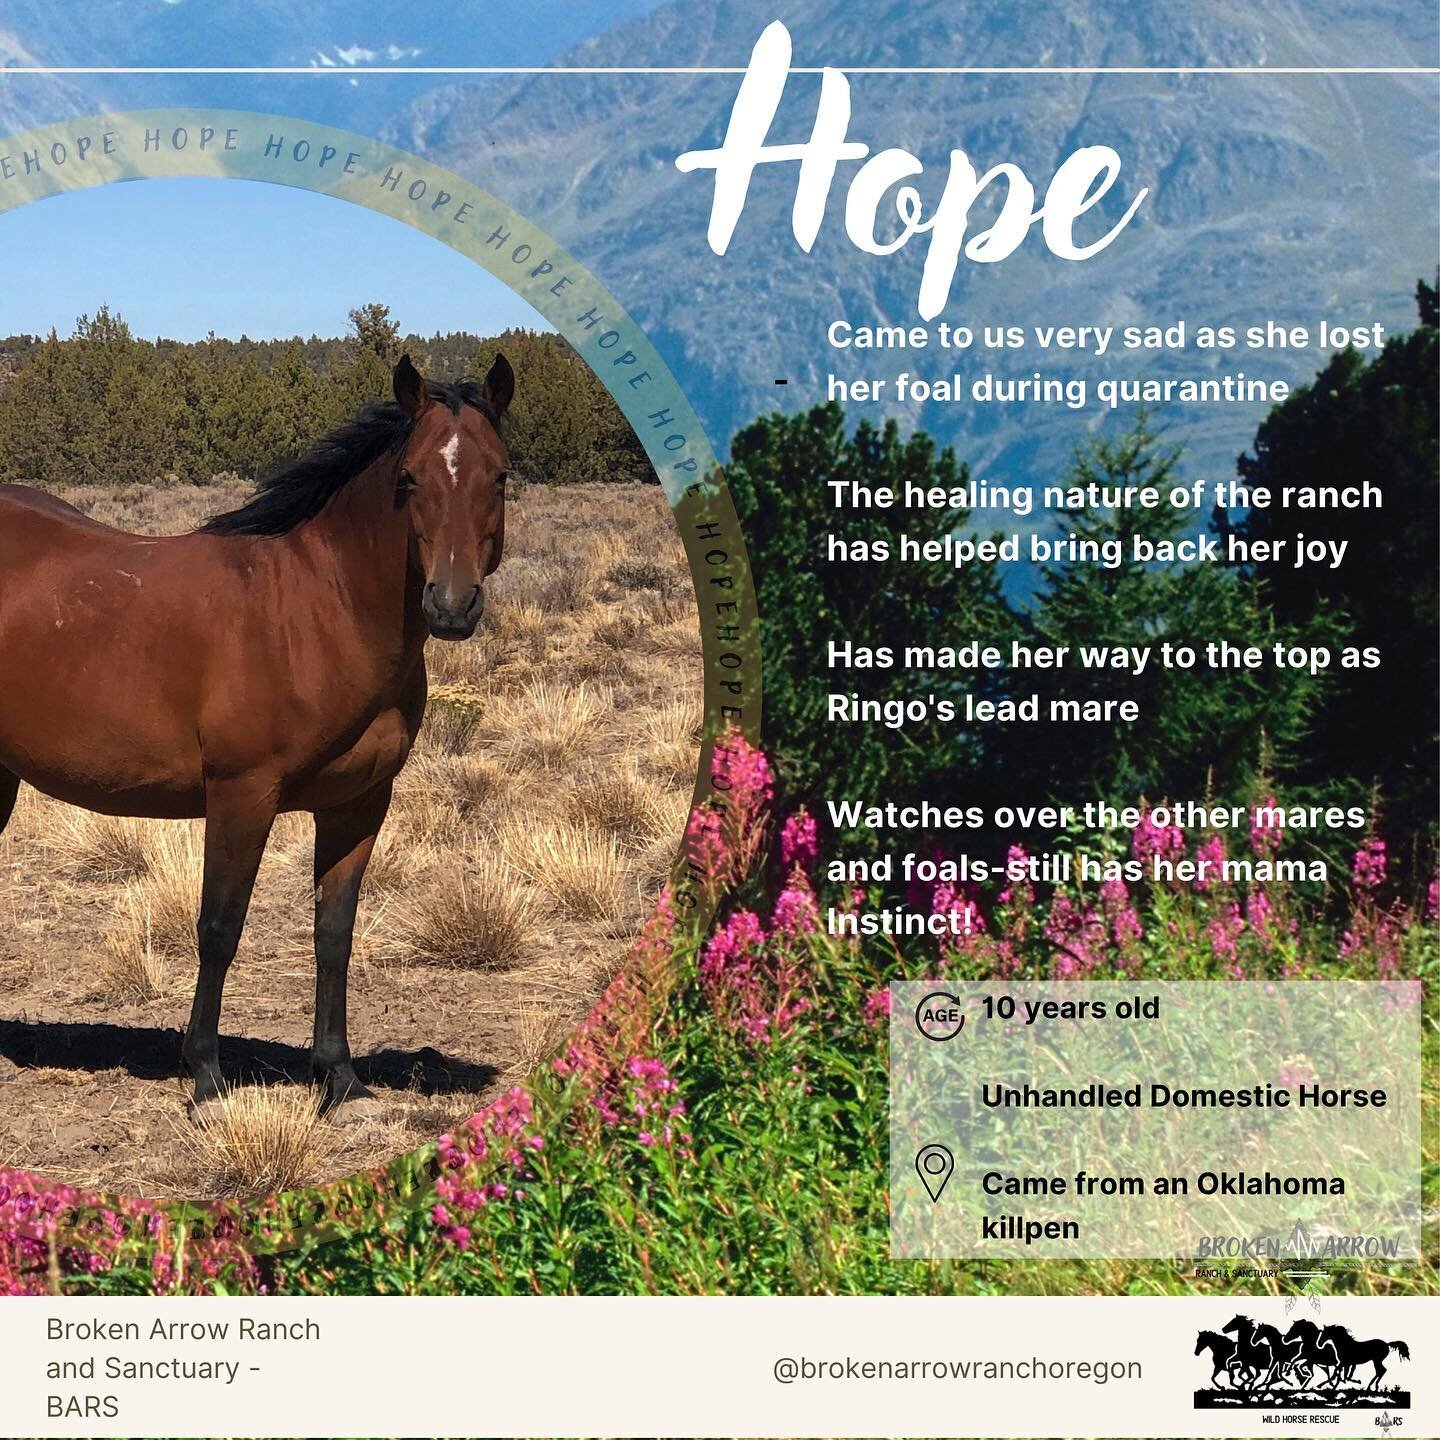 We could all use a little Hope!
.
.
.
#rescue #killpen #wildhorse #wildhorses #rescuehorse #rescueanimals #wildhorserescue #safeact #freedom #safe #ranch #bend #bendoregon #nonprofit